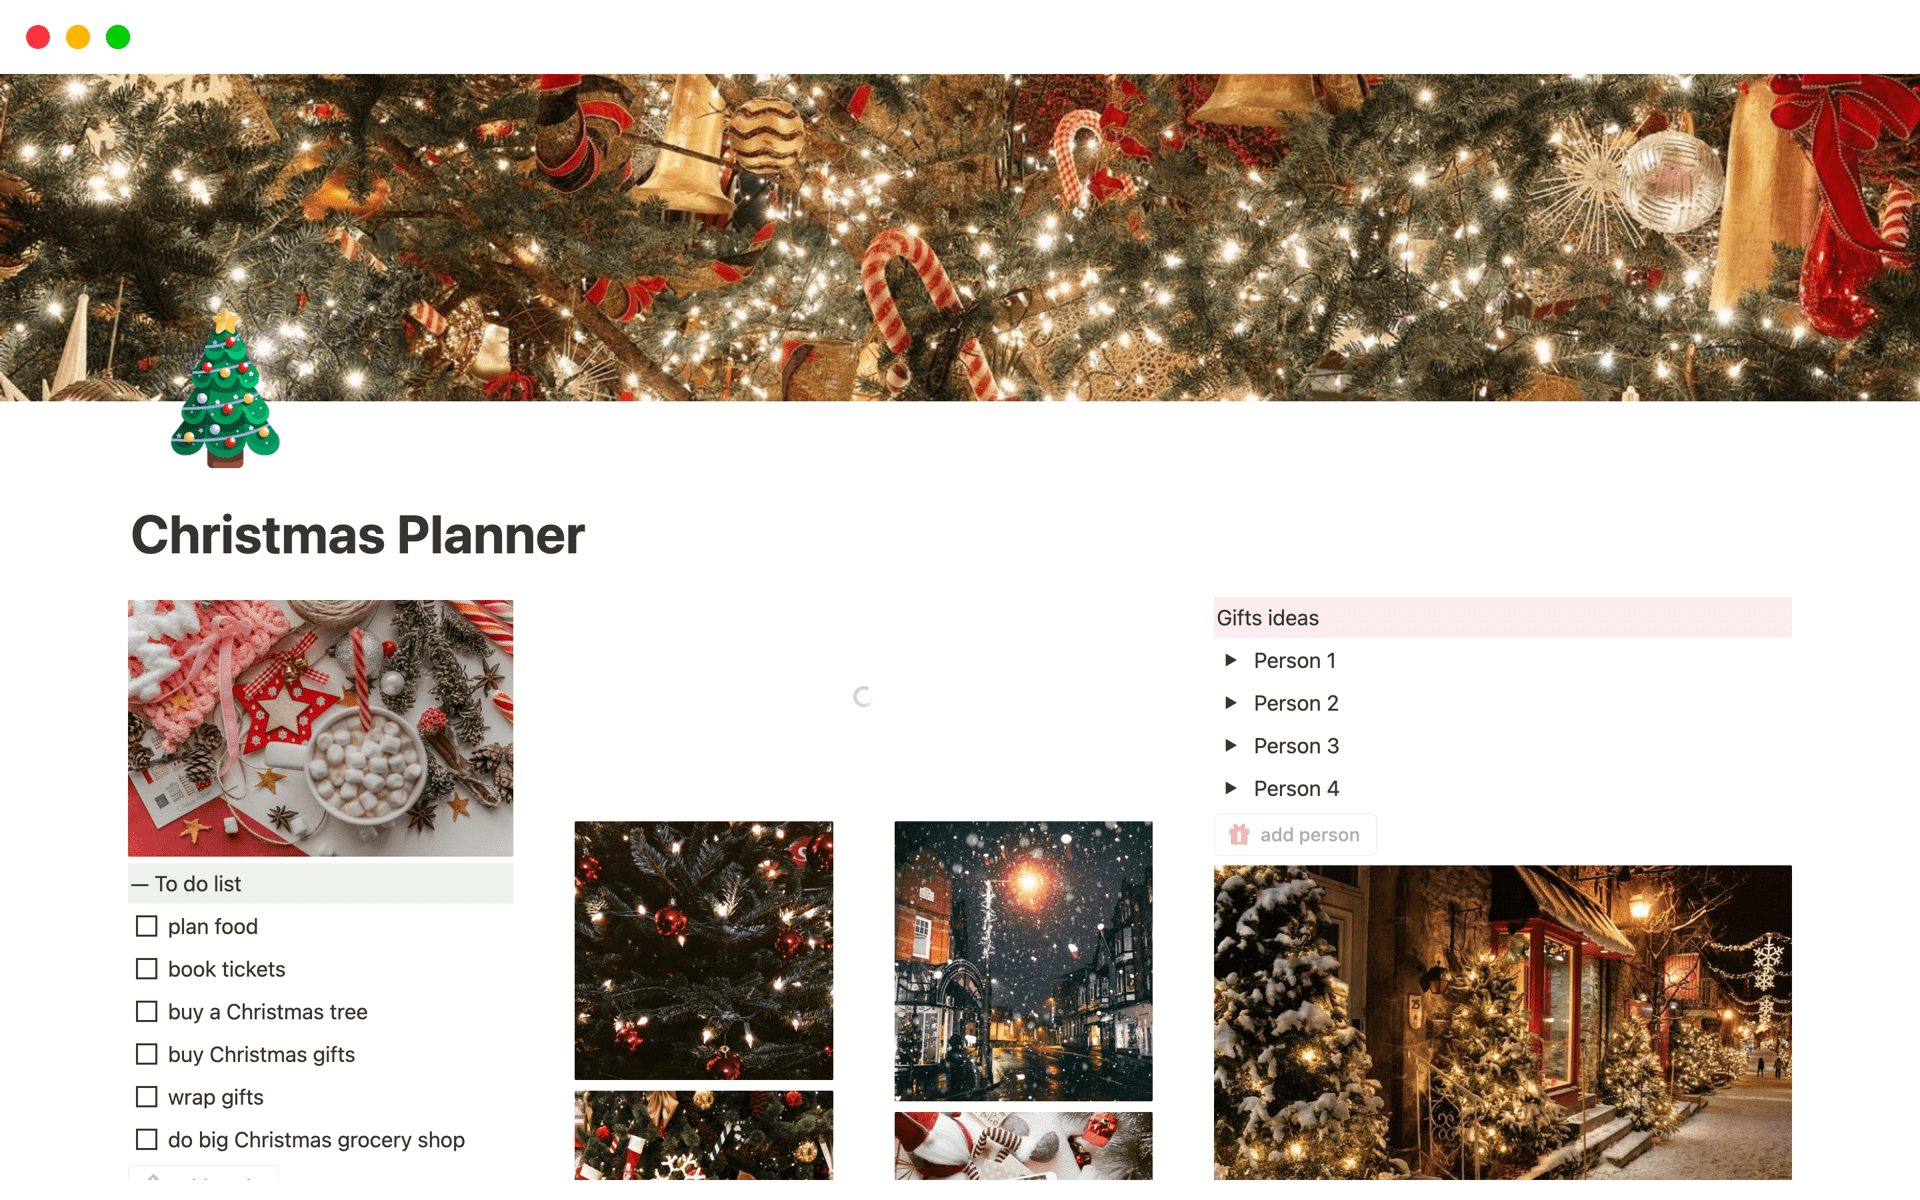 Christmas Planner — gifts, to-do list, monthly log.